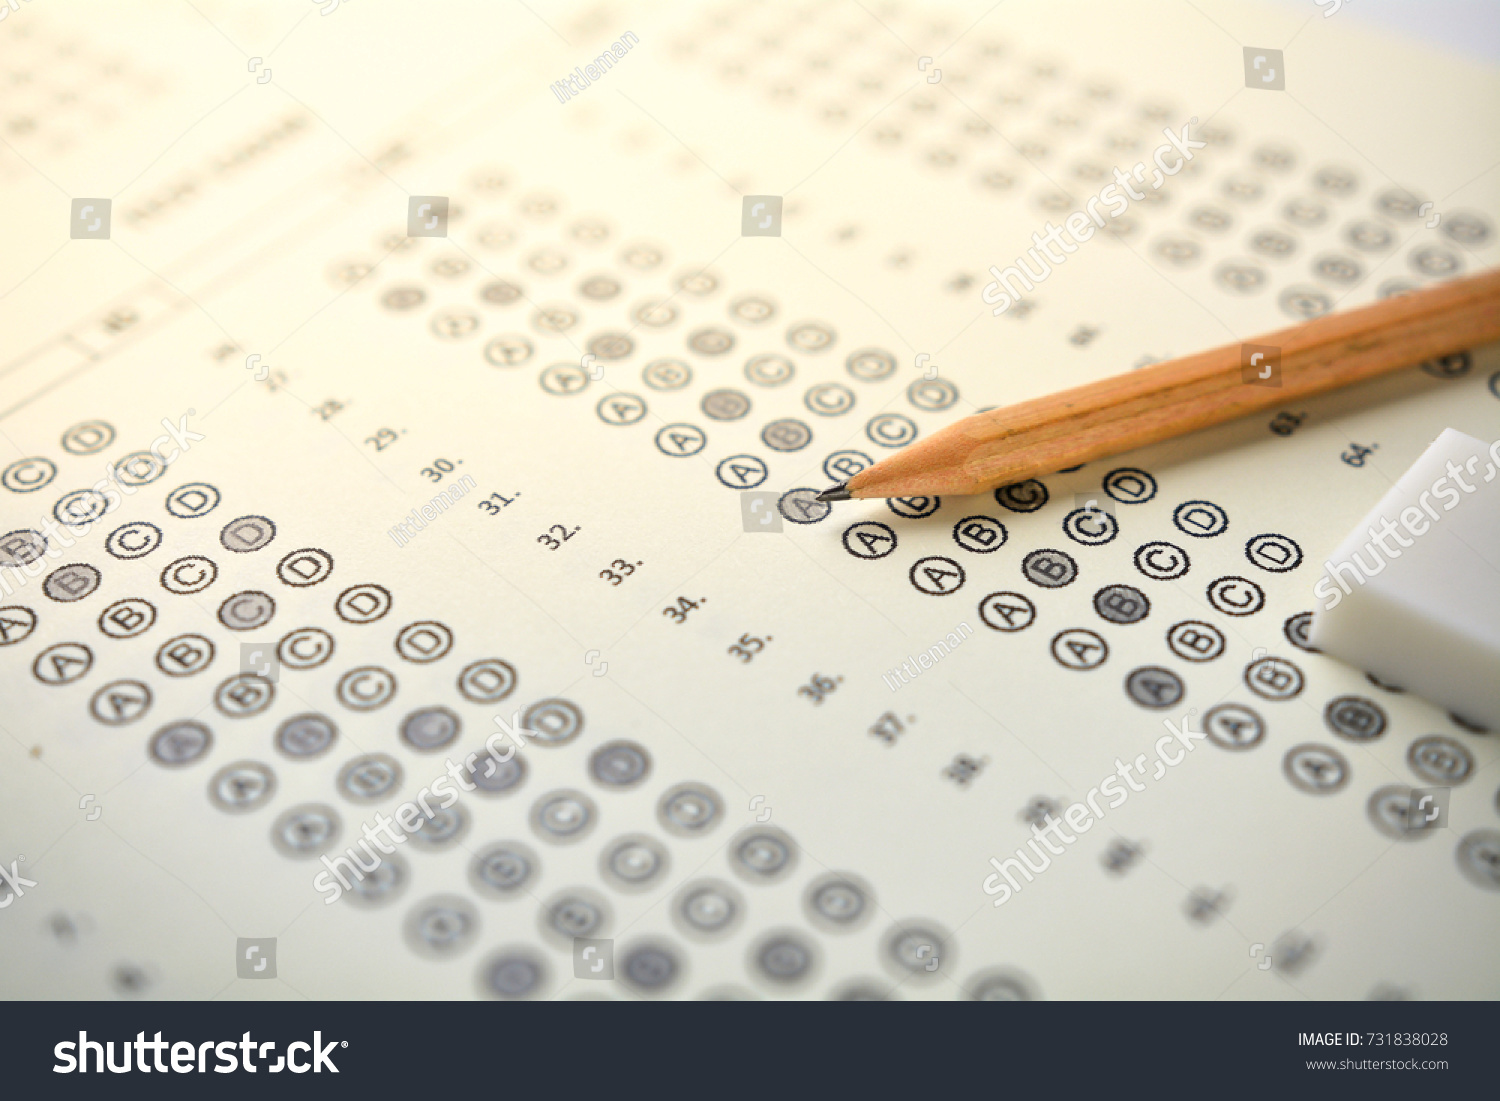 The concept of this image is a device for taking the test by writing the correct answer in the correct answer paper. #731838028